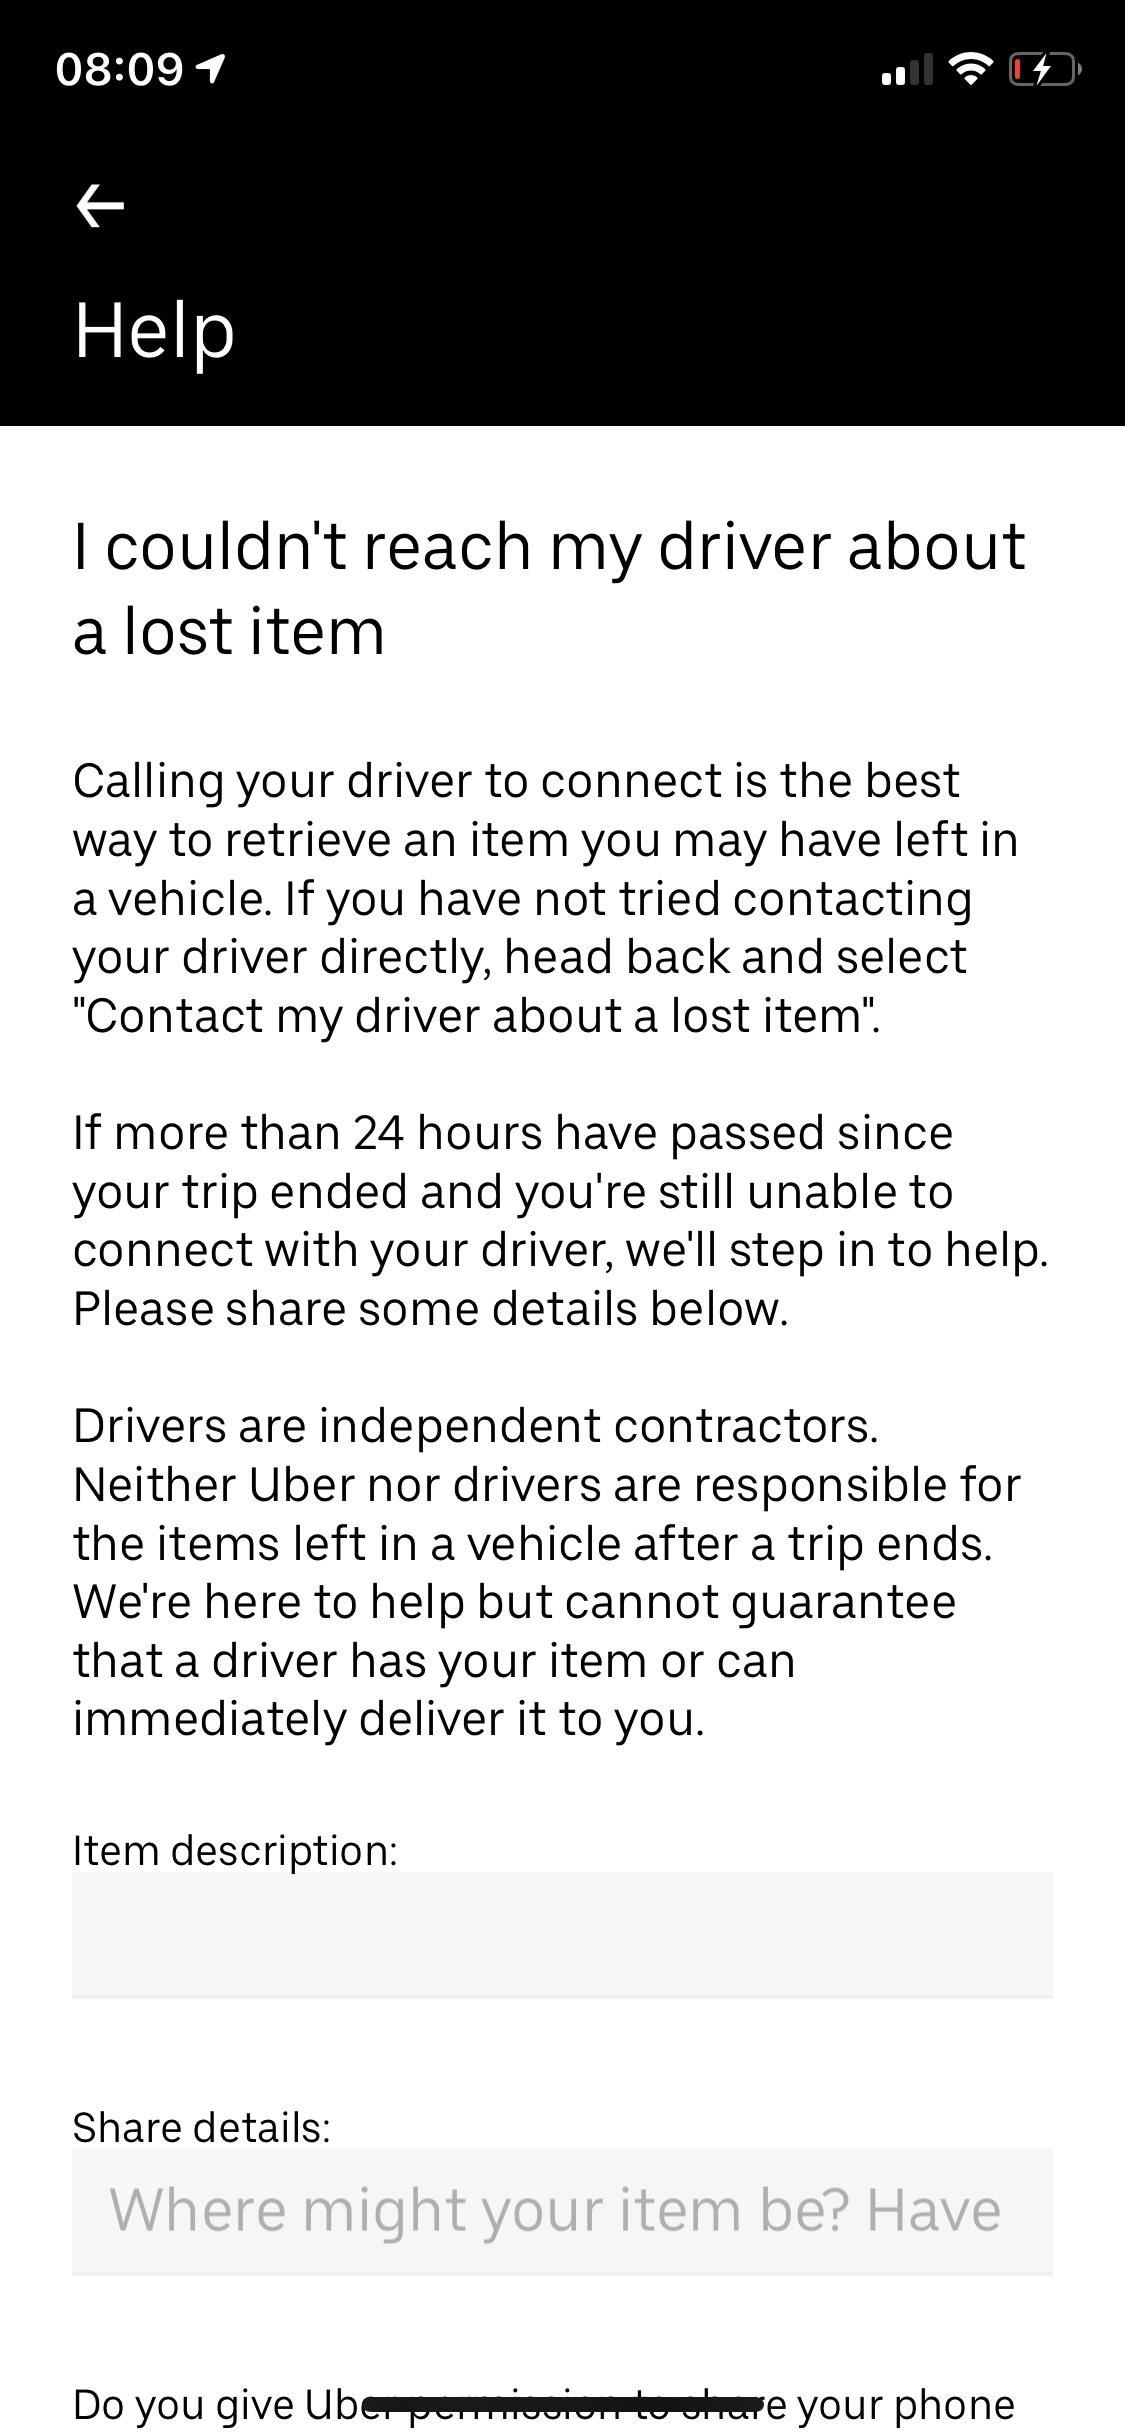 How to Get Your Lost Item Back from an Uber Driver (& What to Do if They Don't Respond)